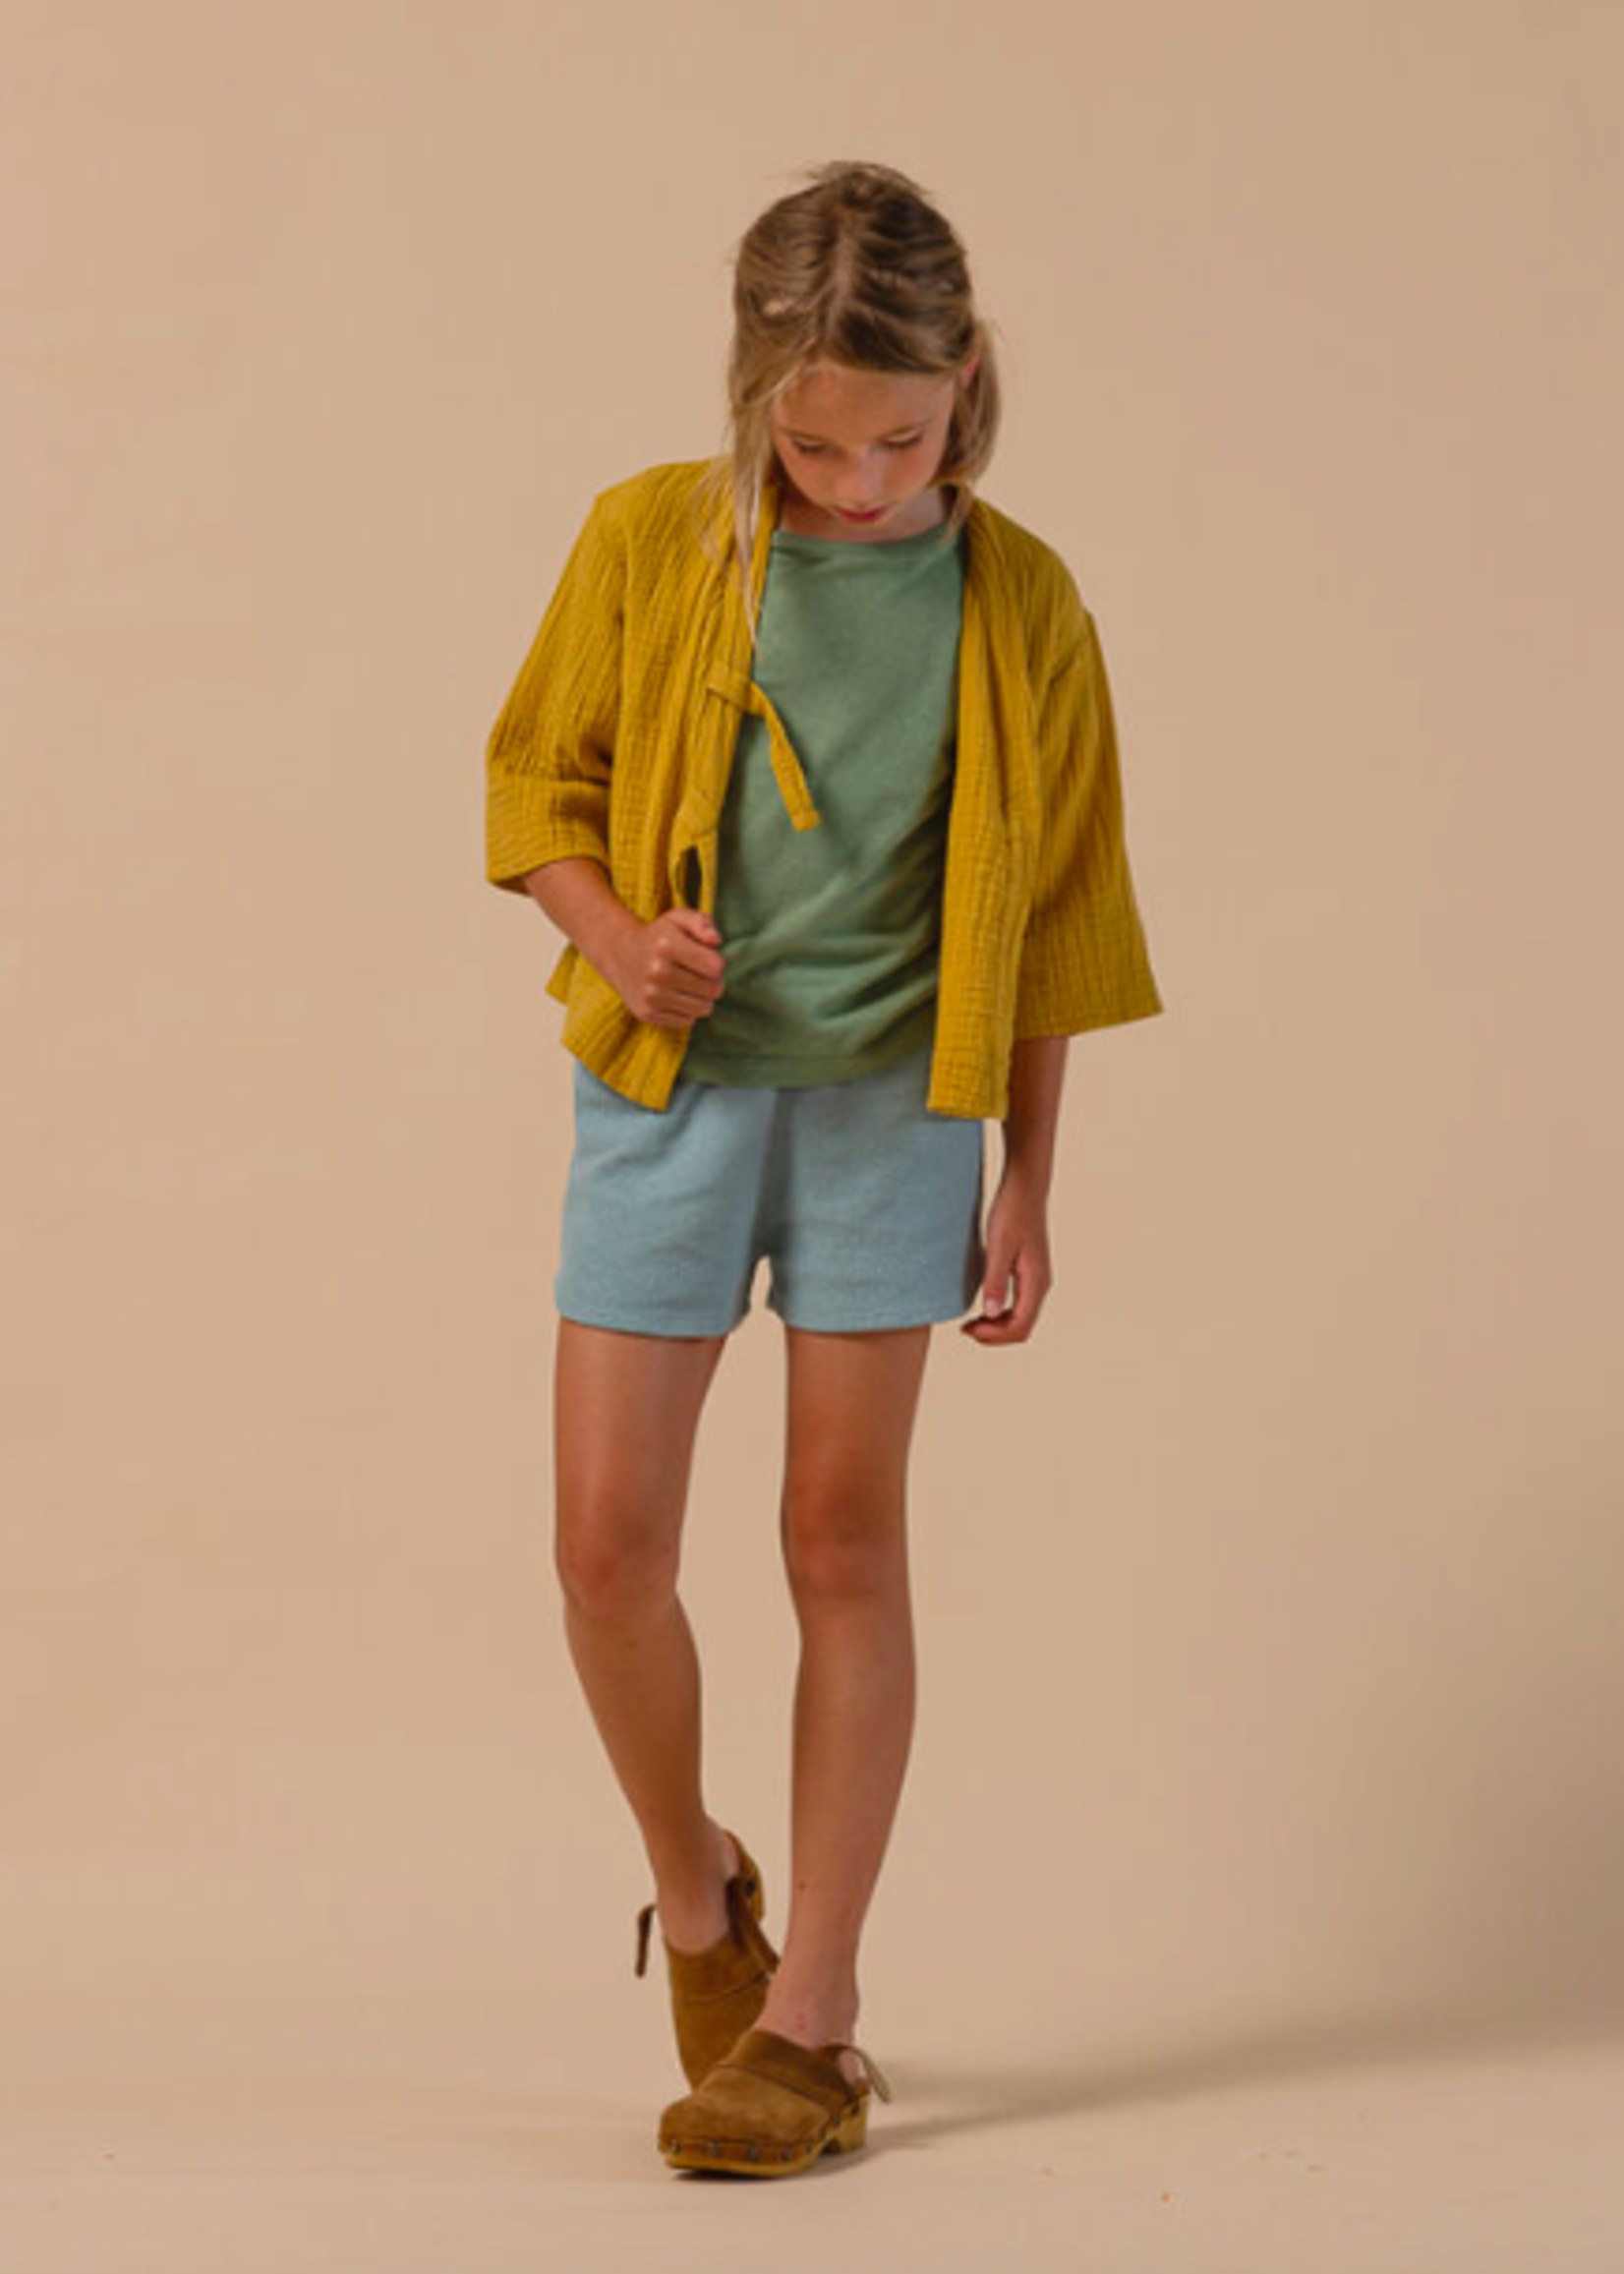 Long Live The Queen Yellow Kimono Blouse/jacket  4-6y